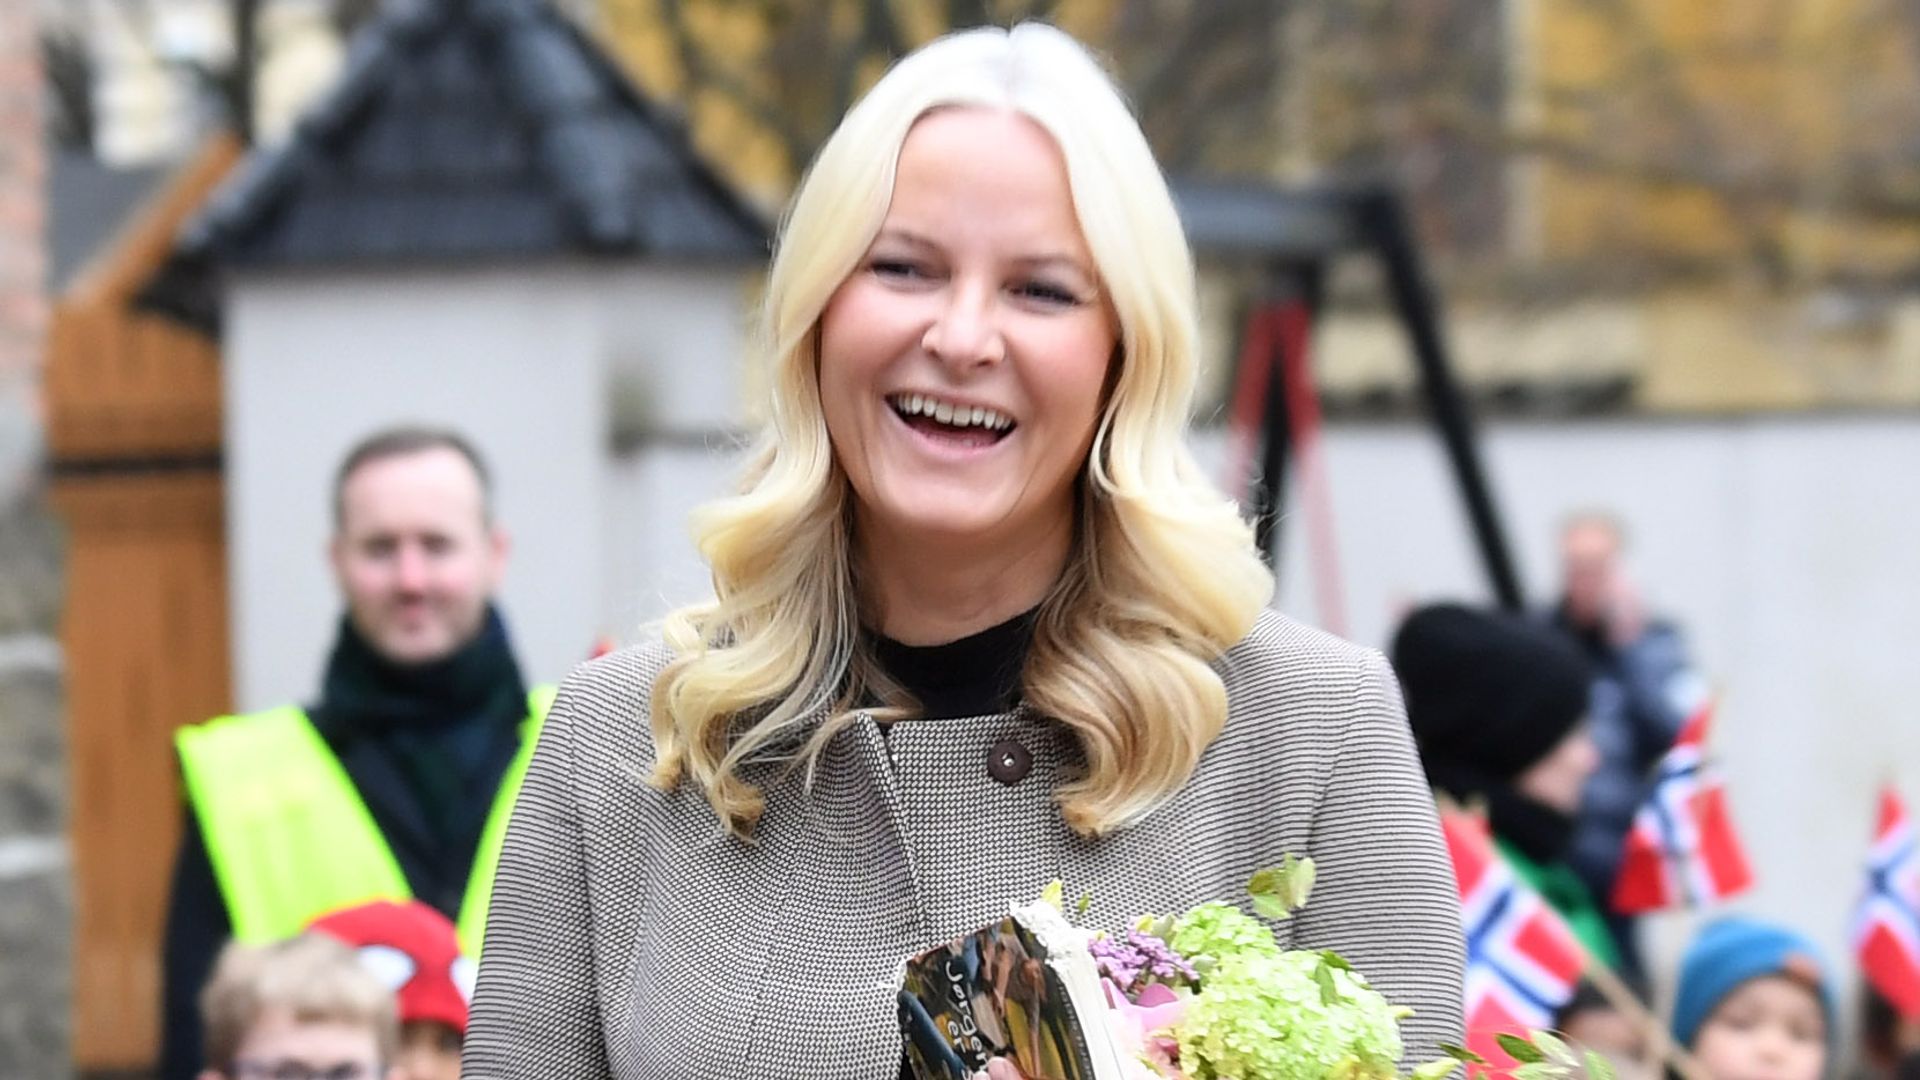 Crown Princess Mette-Marit of Norway smiling in front of crowds of wellwishers